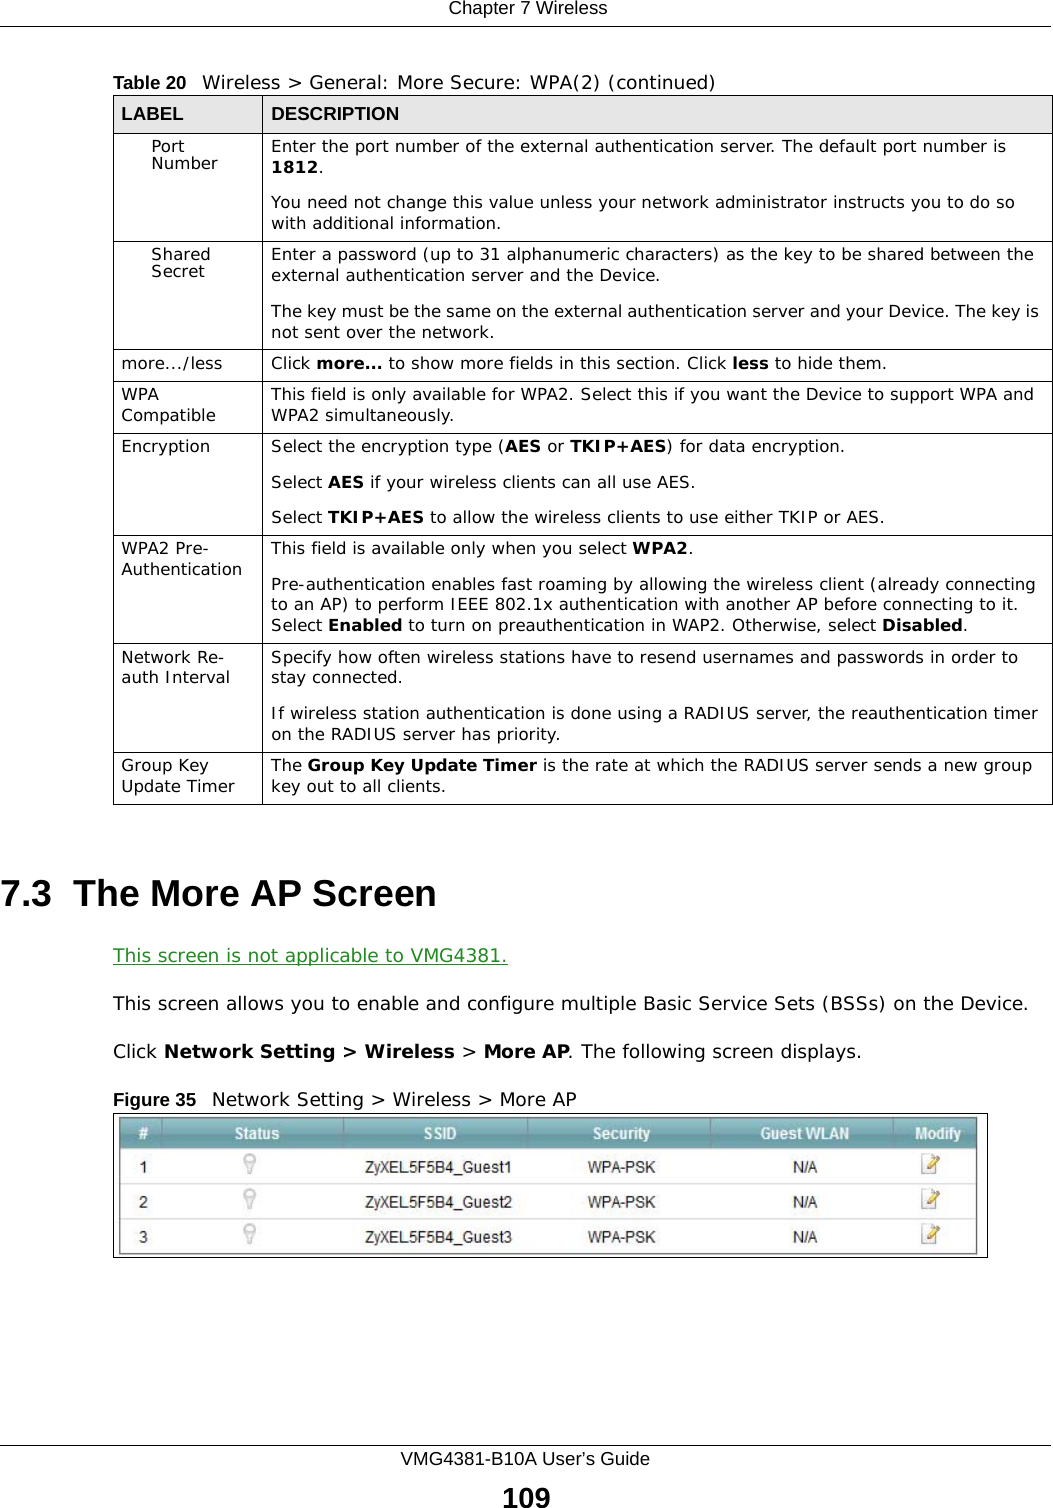  Chapter 7 WirelessVMG4381-B10A User’s Guide1097.3  The More AP ScreenThis screen is not applicable to VMG4381.This screen allows you to enable and configure multiple Basic Service Sets (BSSs) on the Device.Click Network Setting &gt; Wireless &gt; More AP. The following screen displays.Figure 35   Network Setting &gt; Wireless &gt; More APPort Number Enter the port number of the external authentication server. The default port number is 1812. You need not change this value unless your network administrator instructs you to do so with additional information. Shared Secret Enter a password (up to 31 alphanumeric characters) as the key to be shared between the external authentication server and the Device.The key must be the same on the external authentication server and your Device. The key is not sent over the network. more.../less Click more... to show more fields in this section. Click less to hide them.WPA Compatible This field is only available for WPA2. Select this if you want the Device to support WPA and WPA2 simultaneously.Encryption Select the encryption type (AES or TKIP+AES) for data encryption.Select AES if your wireless clients can all use AES.Select TKIP+AES to allow the wireless clients to use either TKIP or AES.WPA2 Pre-Authentication This field is available only when you select WPA2.Pre-authentication enables fast roaming by allowing the wireless client (already connecting to an AP) to perform IEEE 802.1x authentication with another AP before connecting to it. Select Enabled to turn on preauthentication in WAP2. Otherwise, select Disabled.Network Re-auth Interval Specify how often wireless stations have to resend usernames and passwords in order to stay connected.If wireless station authentication is done using a RADIUS server, the reauthentication timer on the RADIUS server has priority.Group Key Update Timer The Group Key Update Timer is the rate at which the RADIUS server sends a new group key out to all clients. Table 20   Wireless &gt; General: More Secure: WPA(2) (continued)LABEL DESCRIPTION